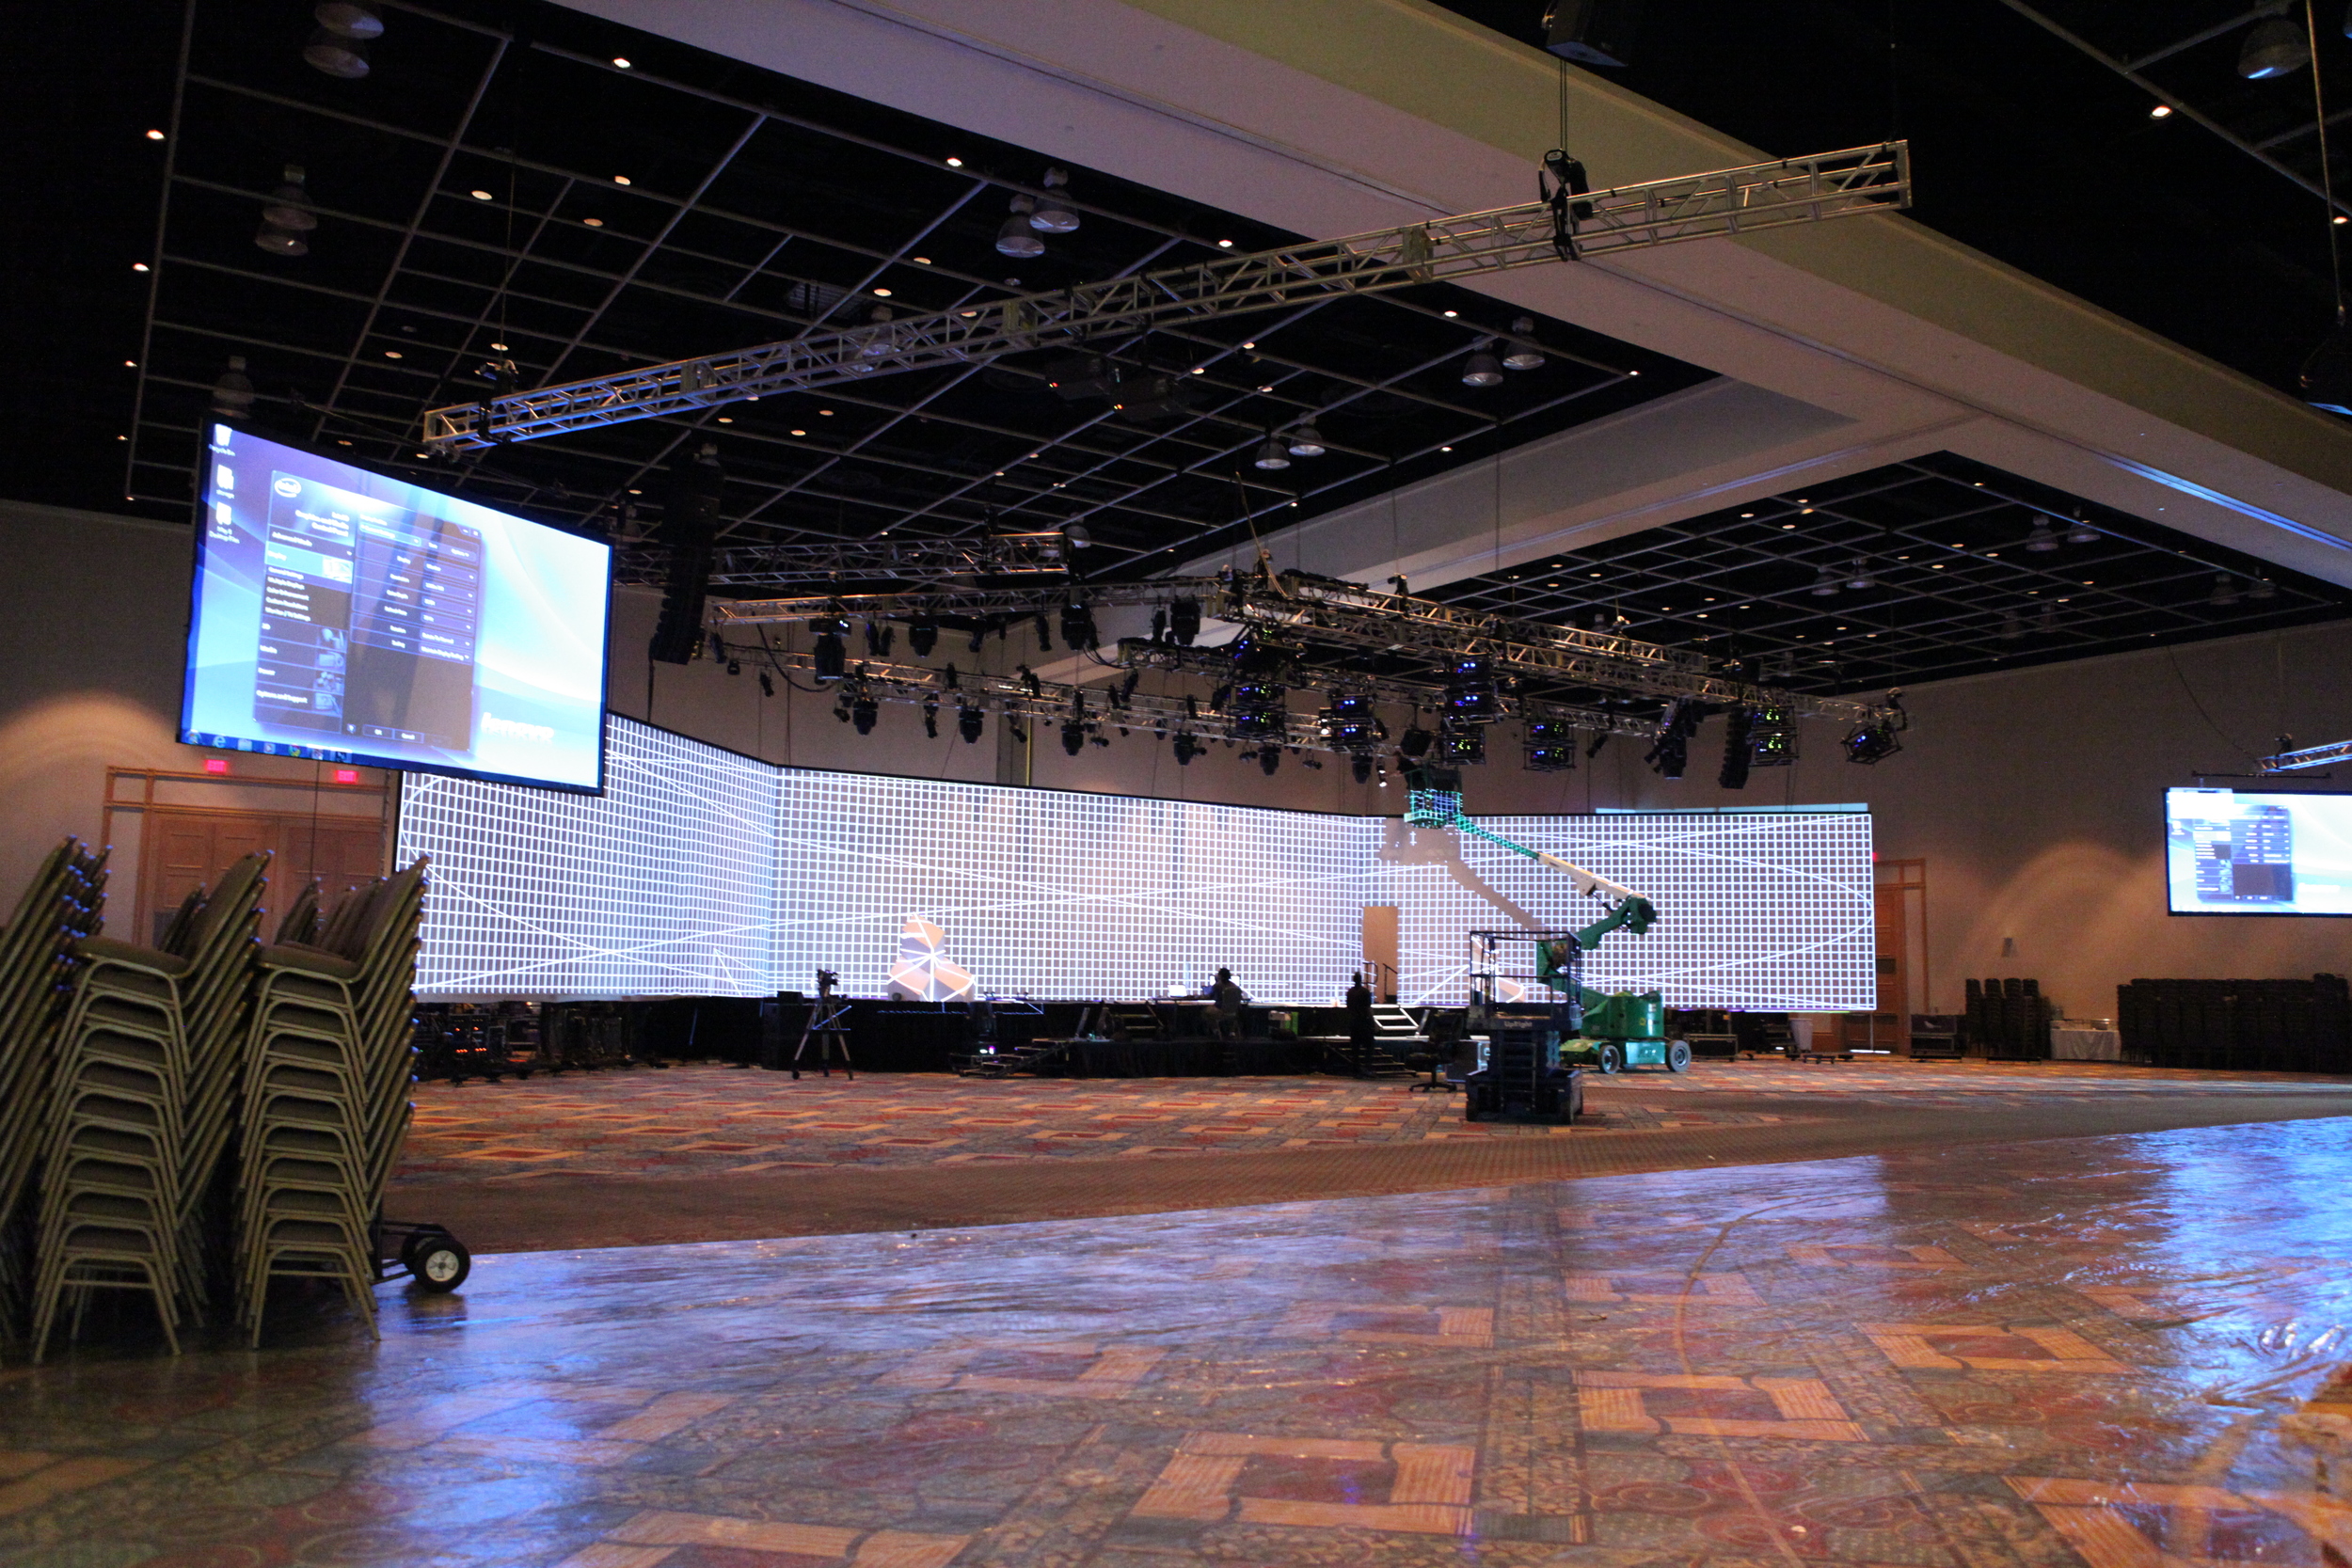 An image of Tri-Marq technical directors on a site survey, inspecting the wide screen before the event.